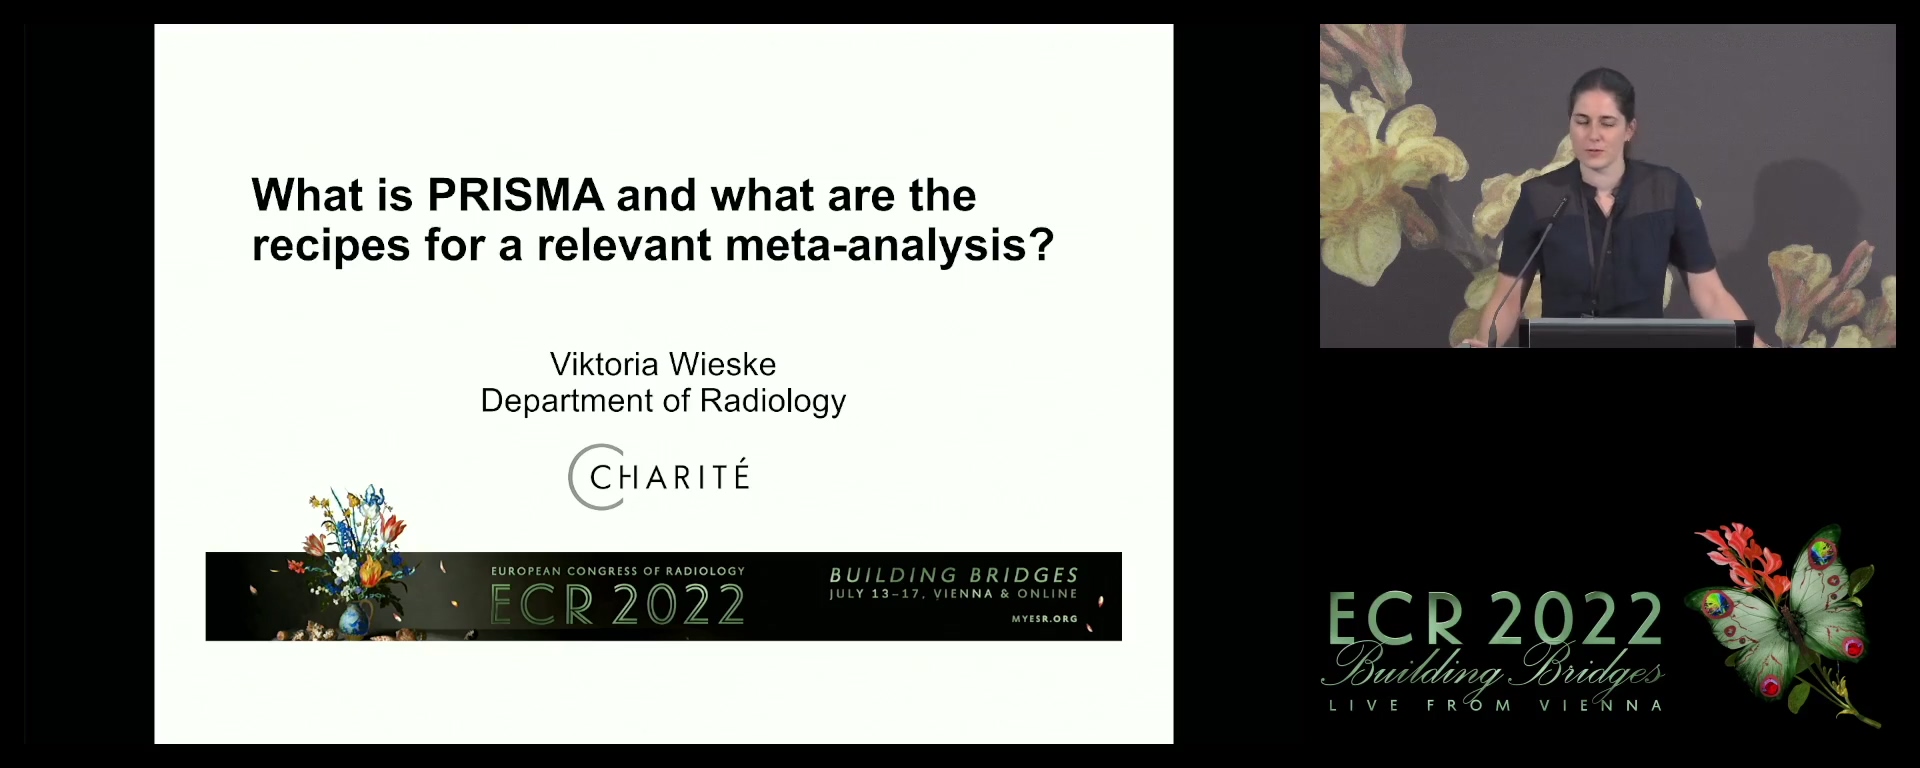 What is PRISMA and what are the recipes for a relevant meta-analysis? - Viktoria Wieske, Berlin / DE